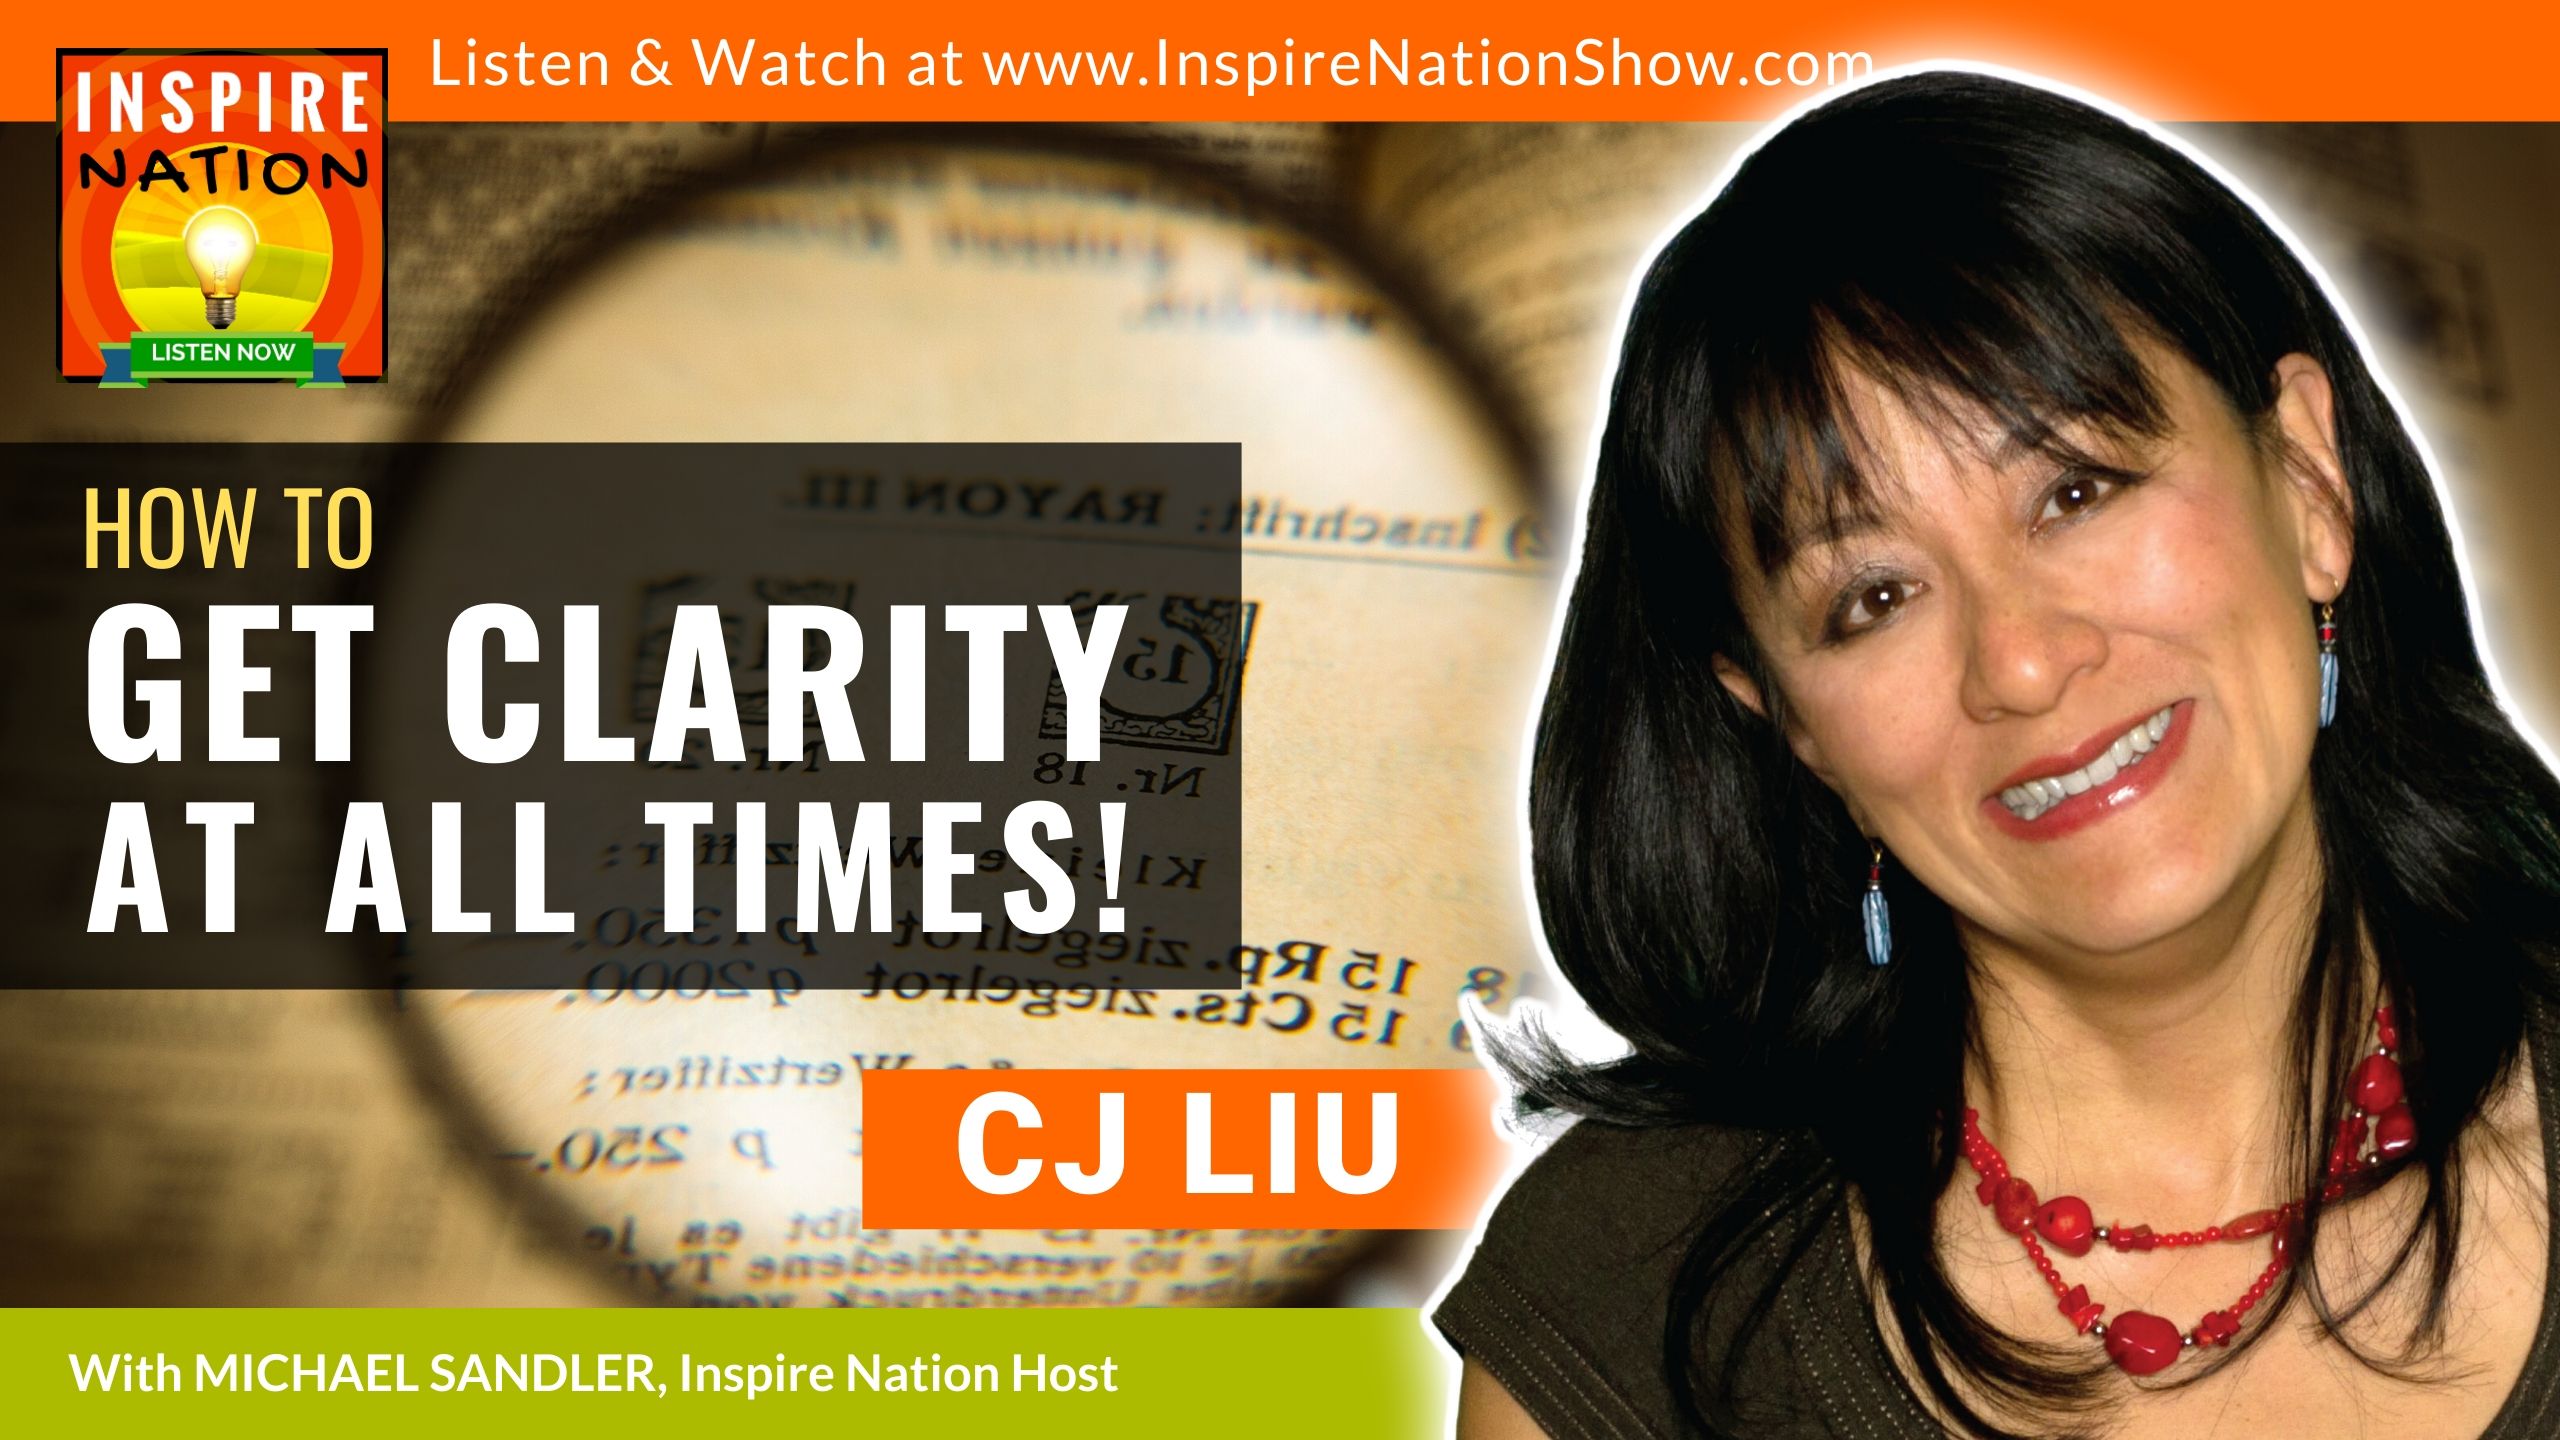 Michael Sandler and CJ Liu chat about how to get clarity at all times!